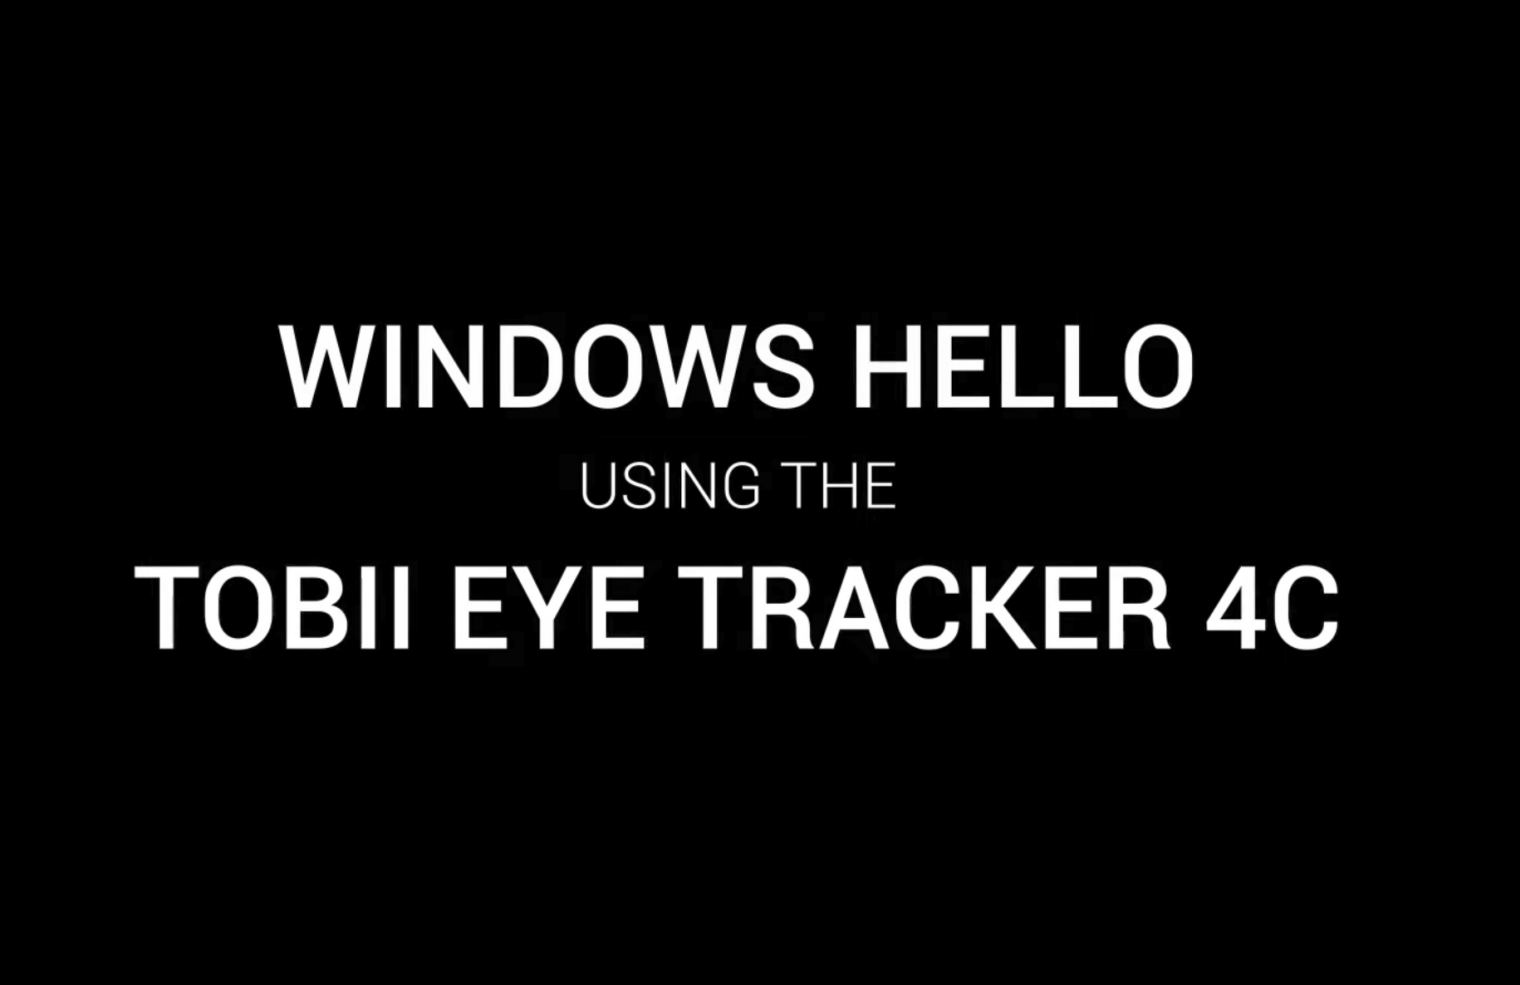 Video of how to set up Windows Hello with your eye tracker